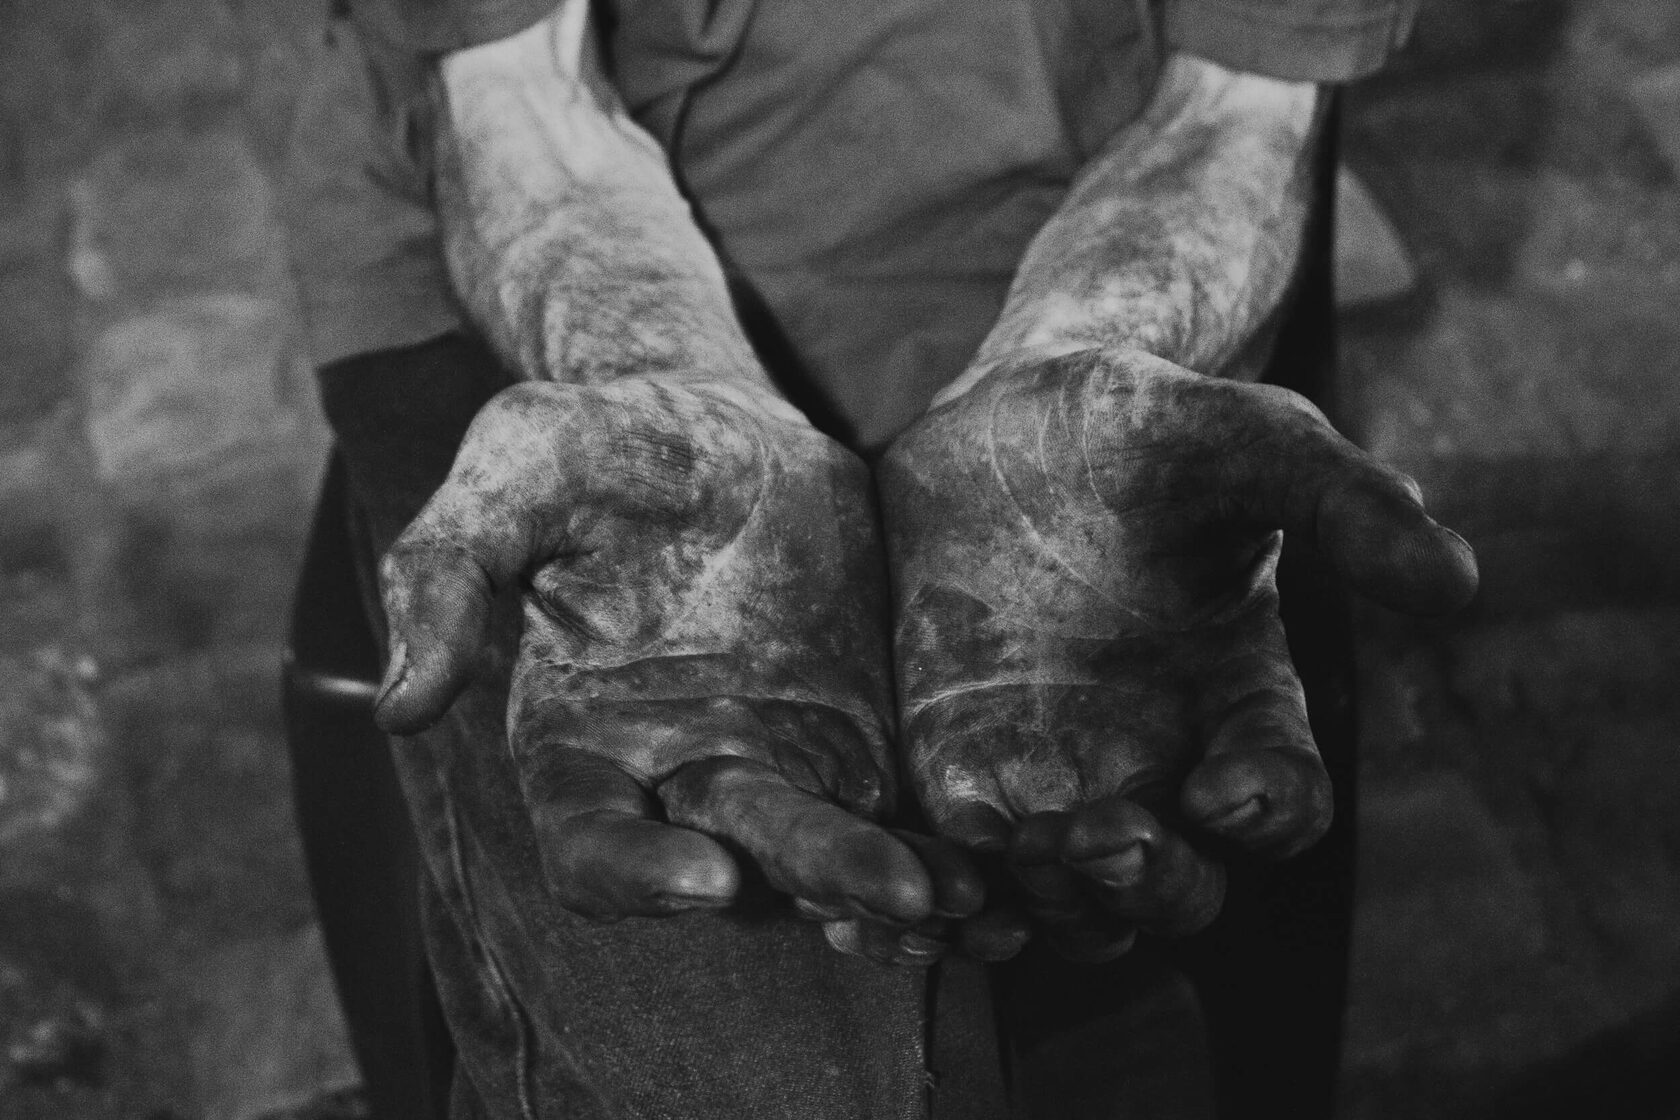 street, photography, black and white, city, people, hands